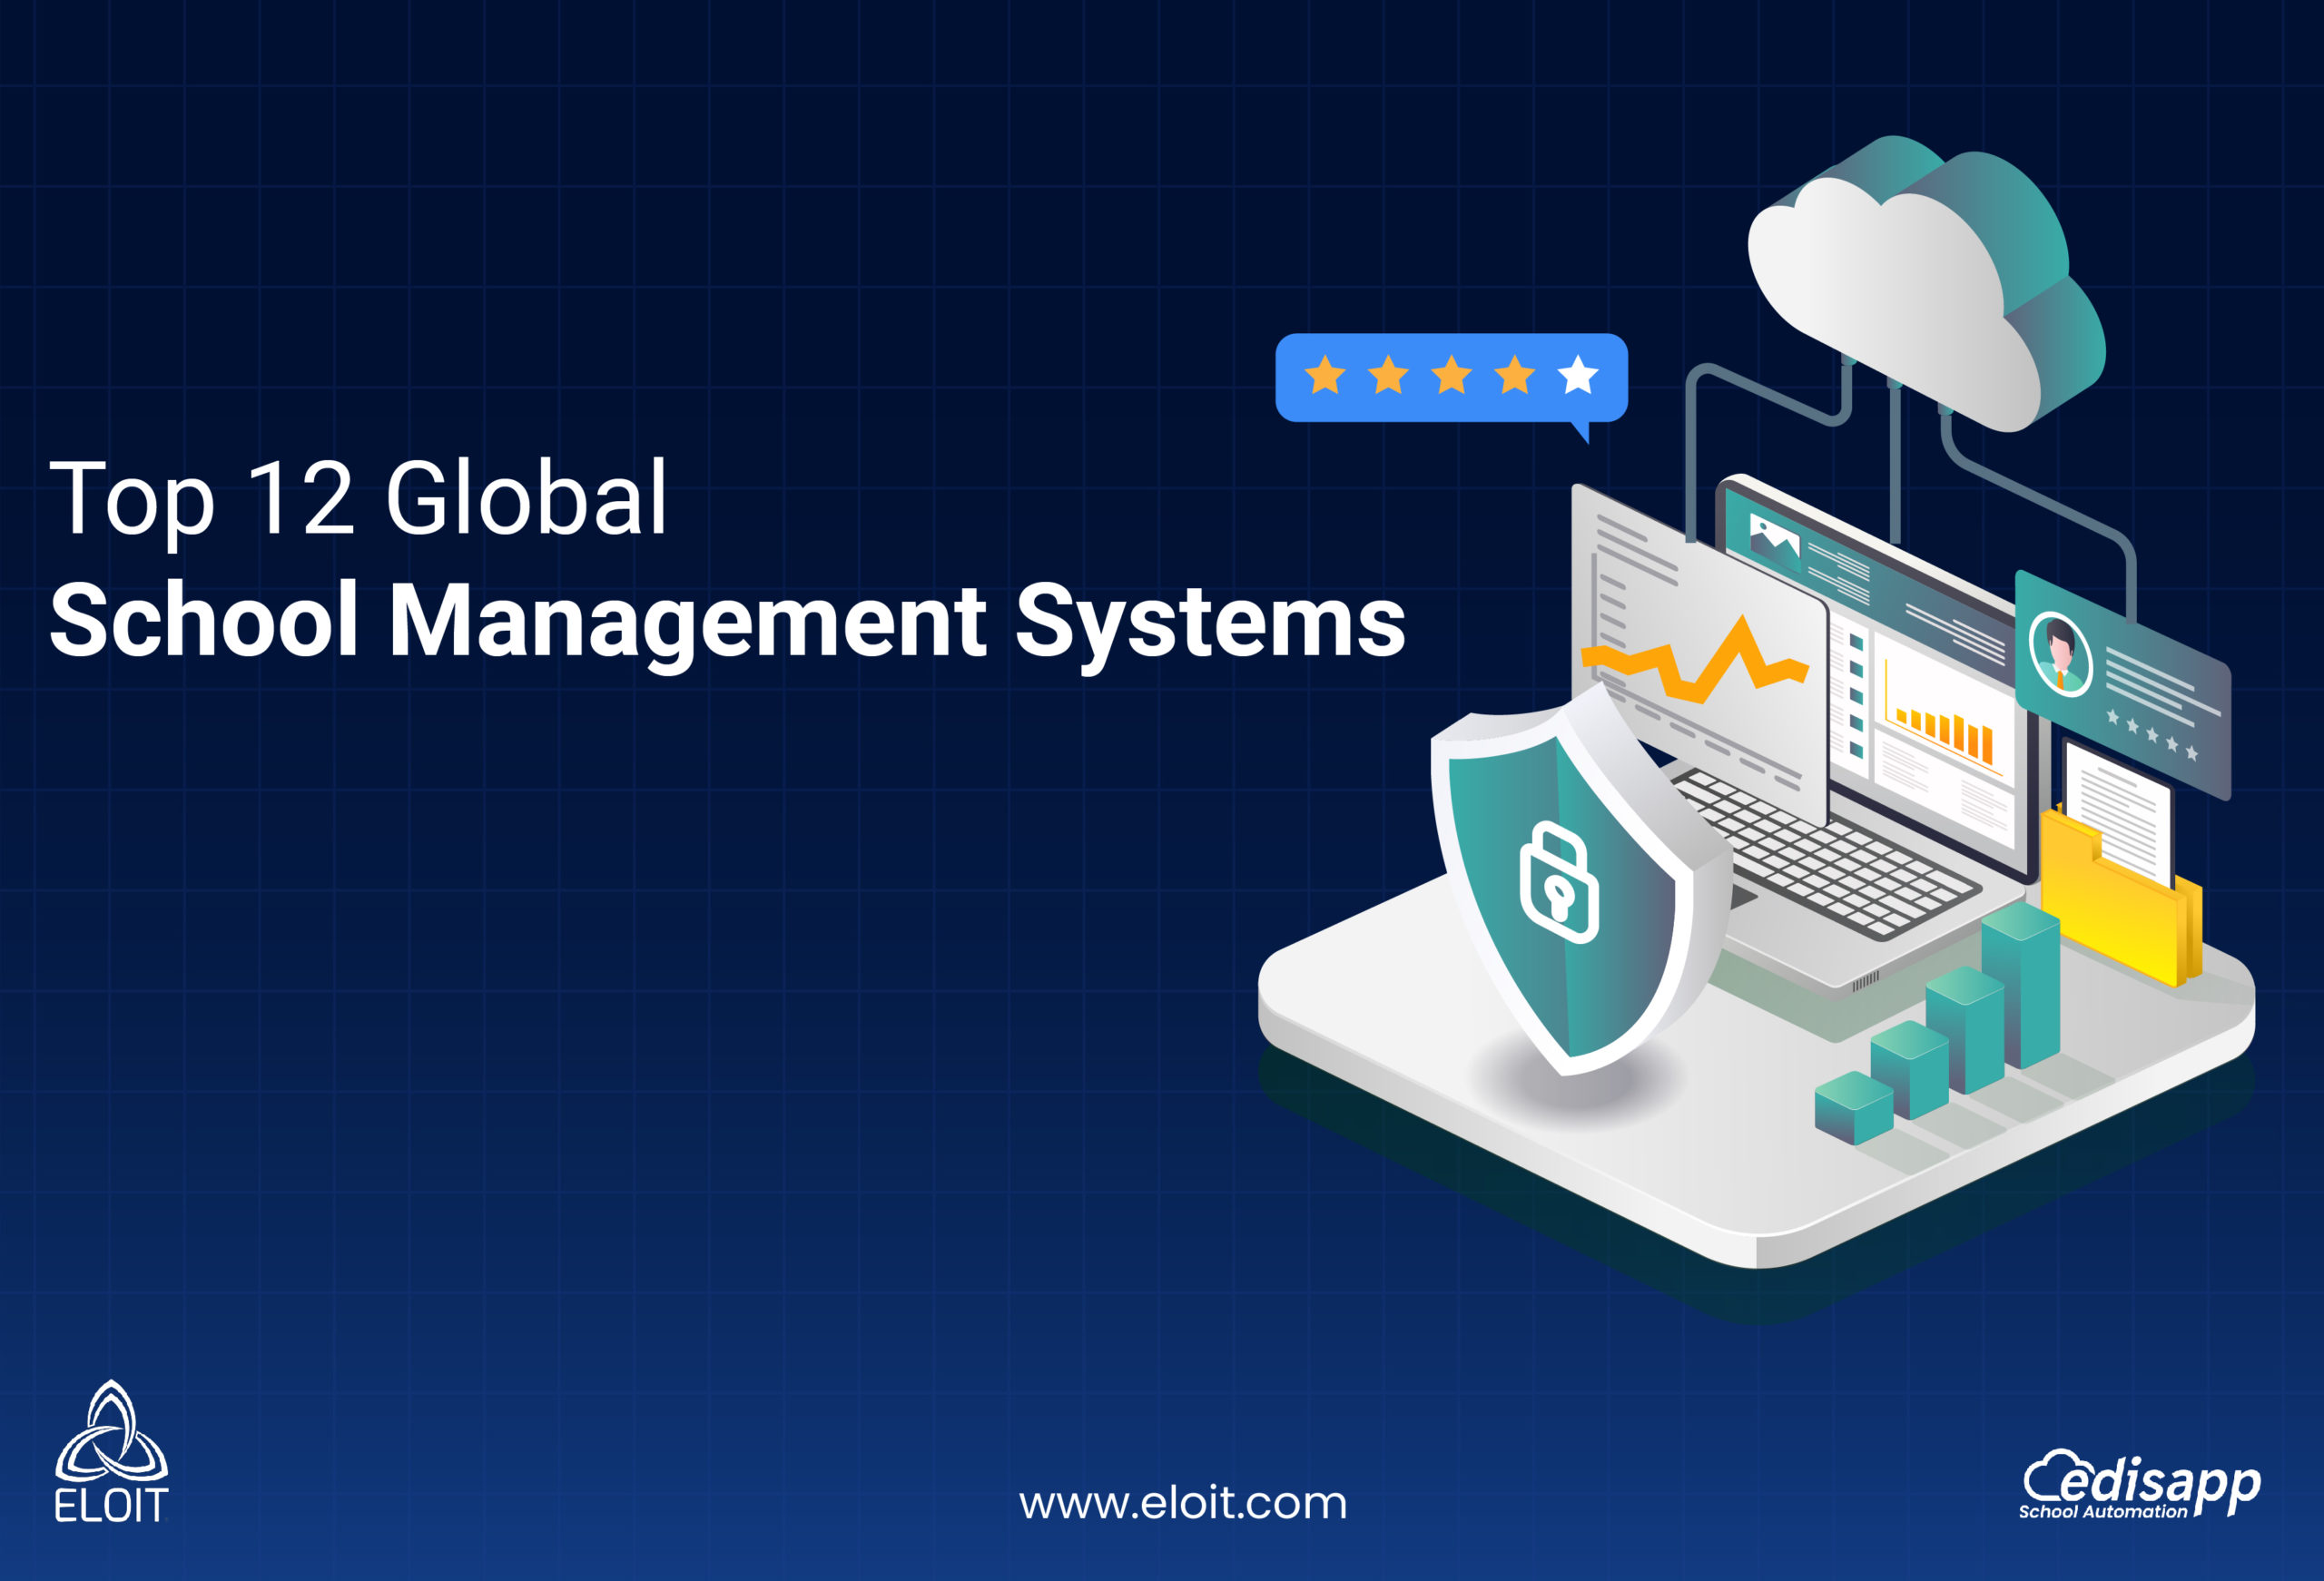 A Guide into the World’s 12 Best Management Software for Schools